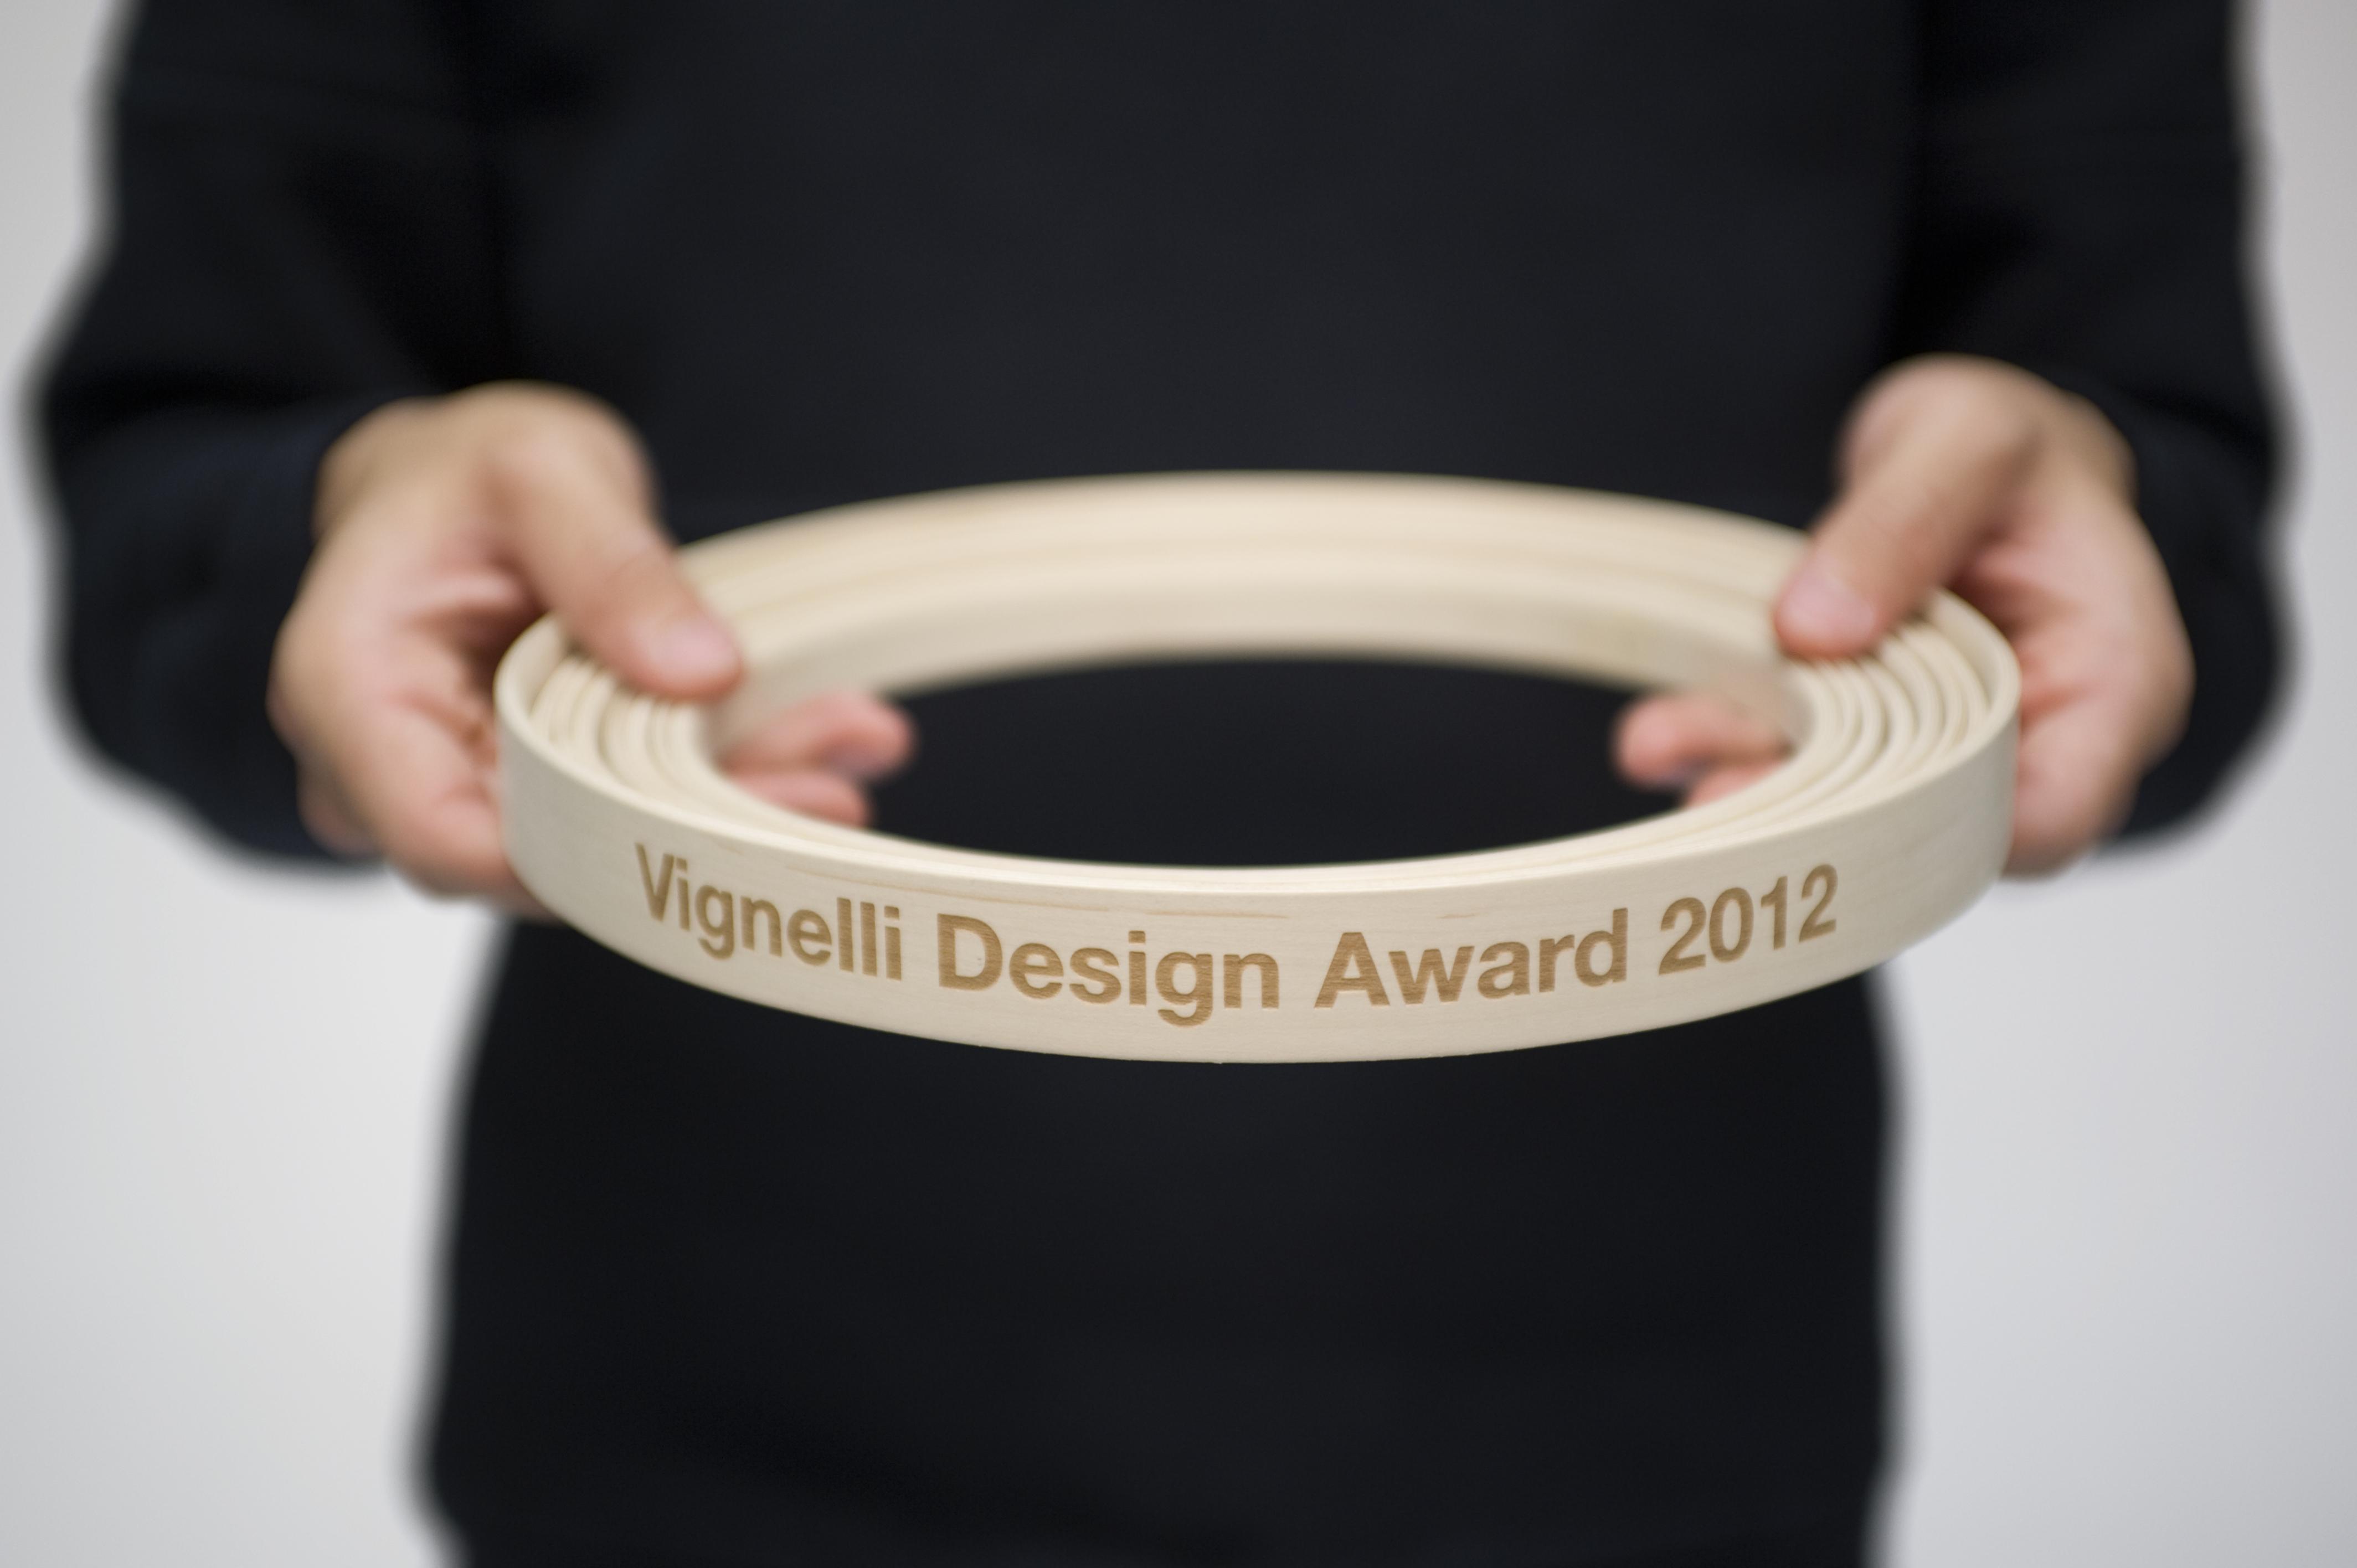 A circular band with Vignelli Design Award 2012 inscribed on it.